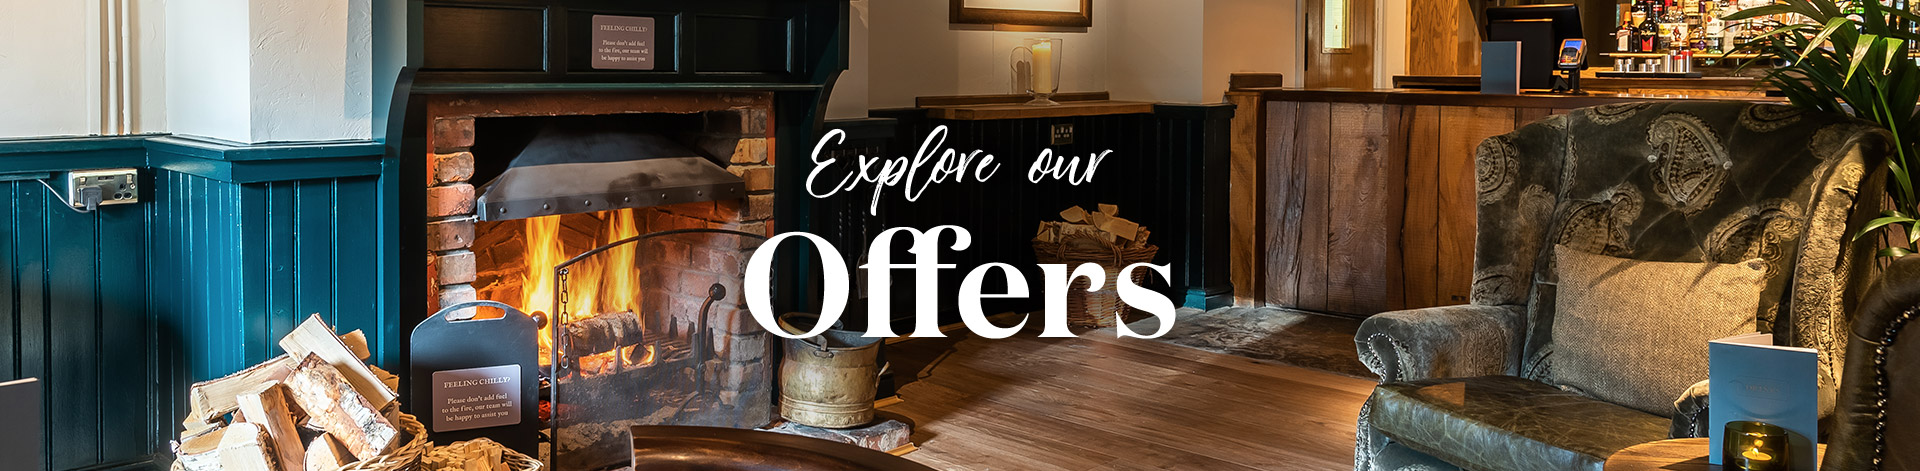 Our latest offers at The Foxglove